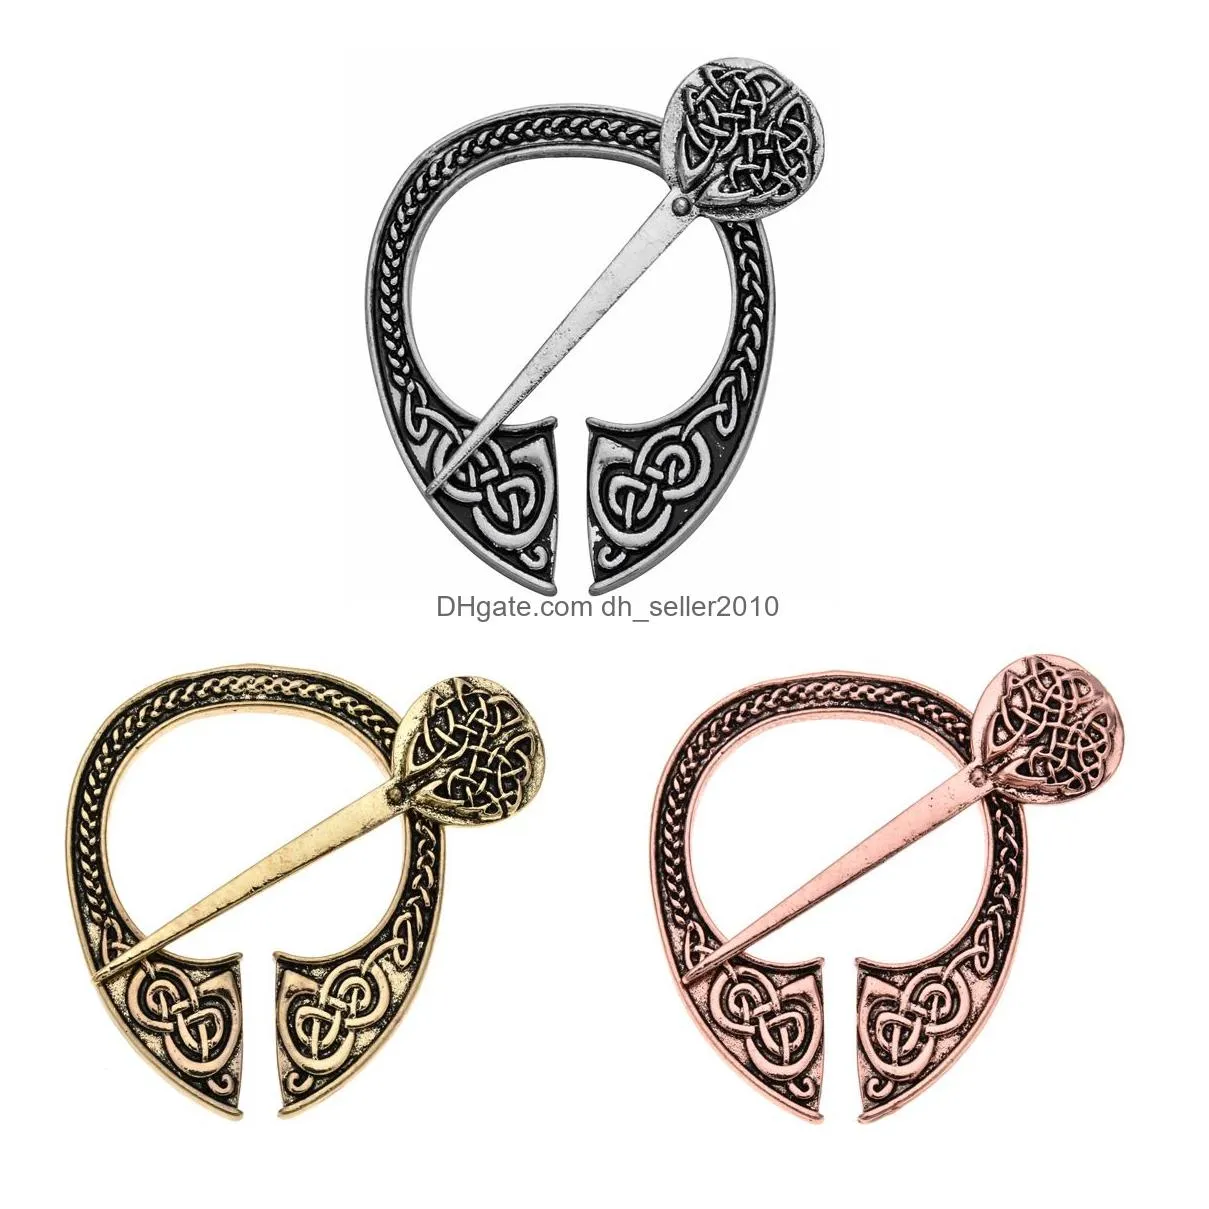 New Fashion Antique Copper Silver Vintage Womens Scarf Brooch Clip Cardigan Sweater Lapel Round Pins Brooches Jewelry Gifts for Girl